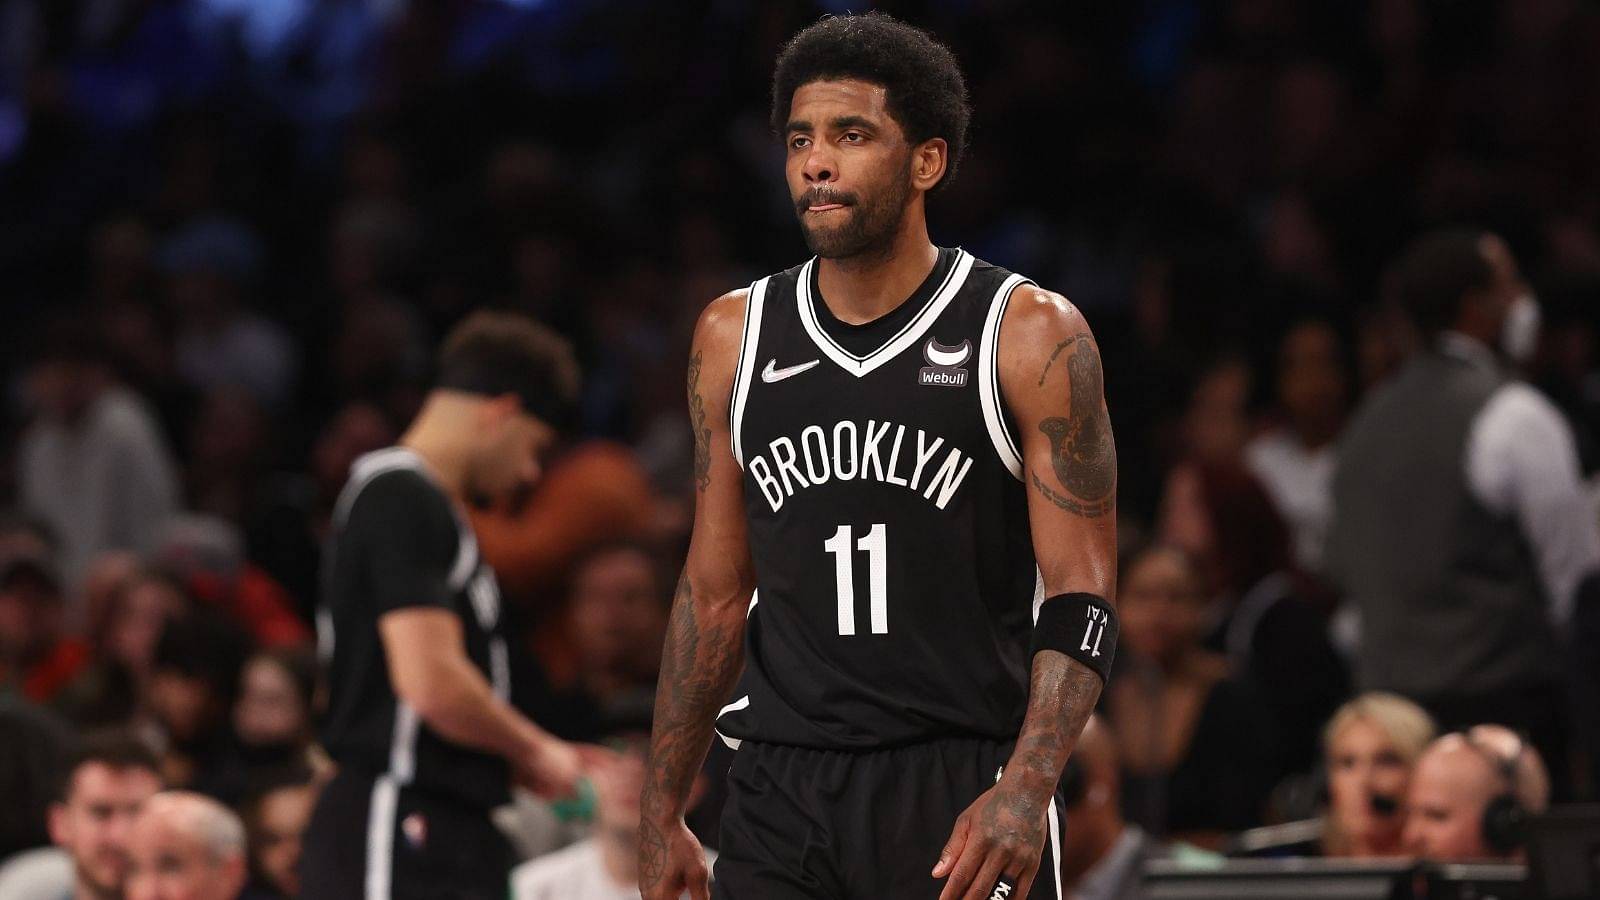 "My presence out there was just bigger than the basketball game": Kyrie Irving spits a huge comment on his first game back in Brooklyn